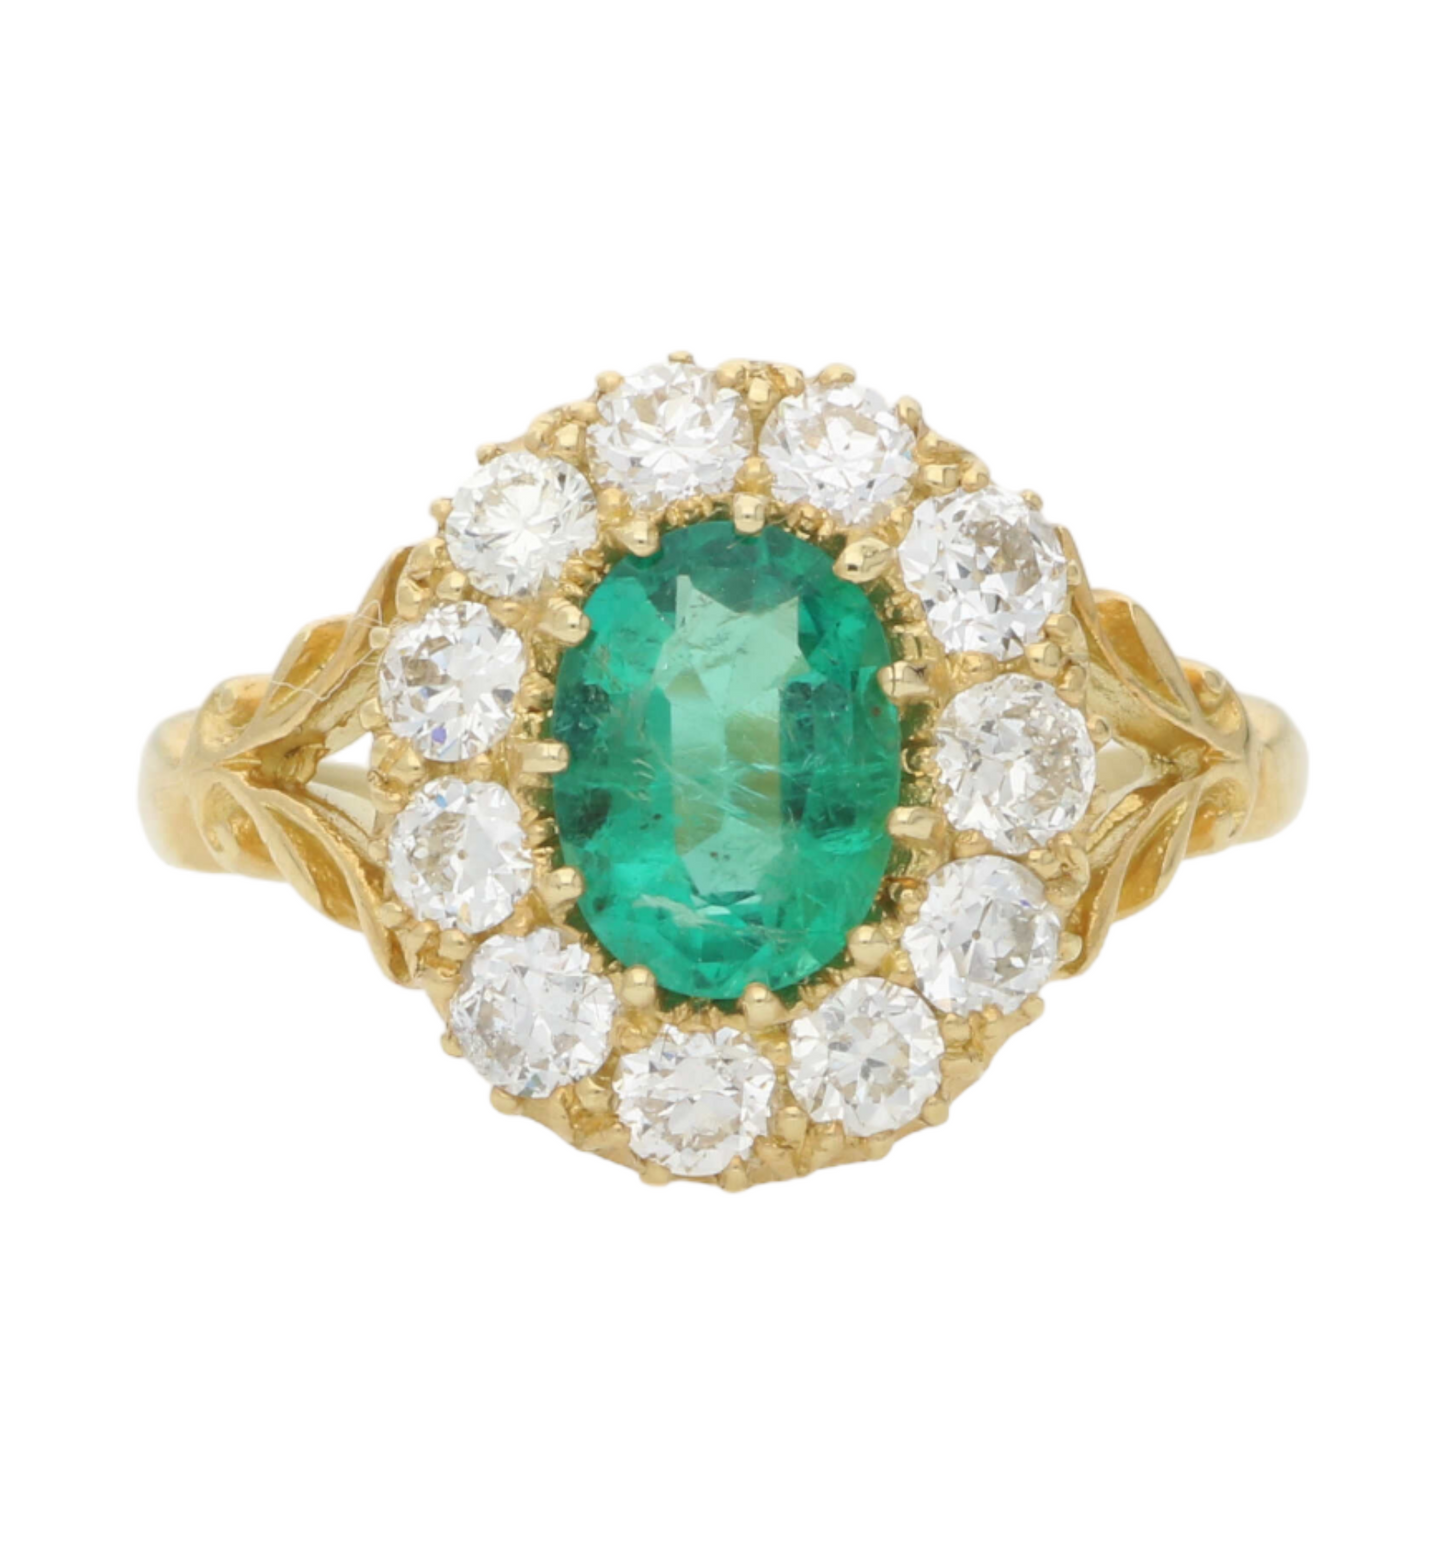 18ct emerald and diamond cluster ring